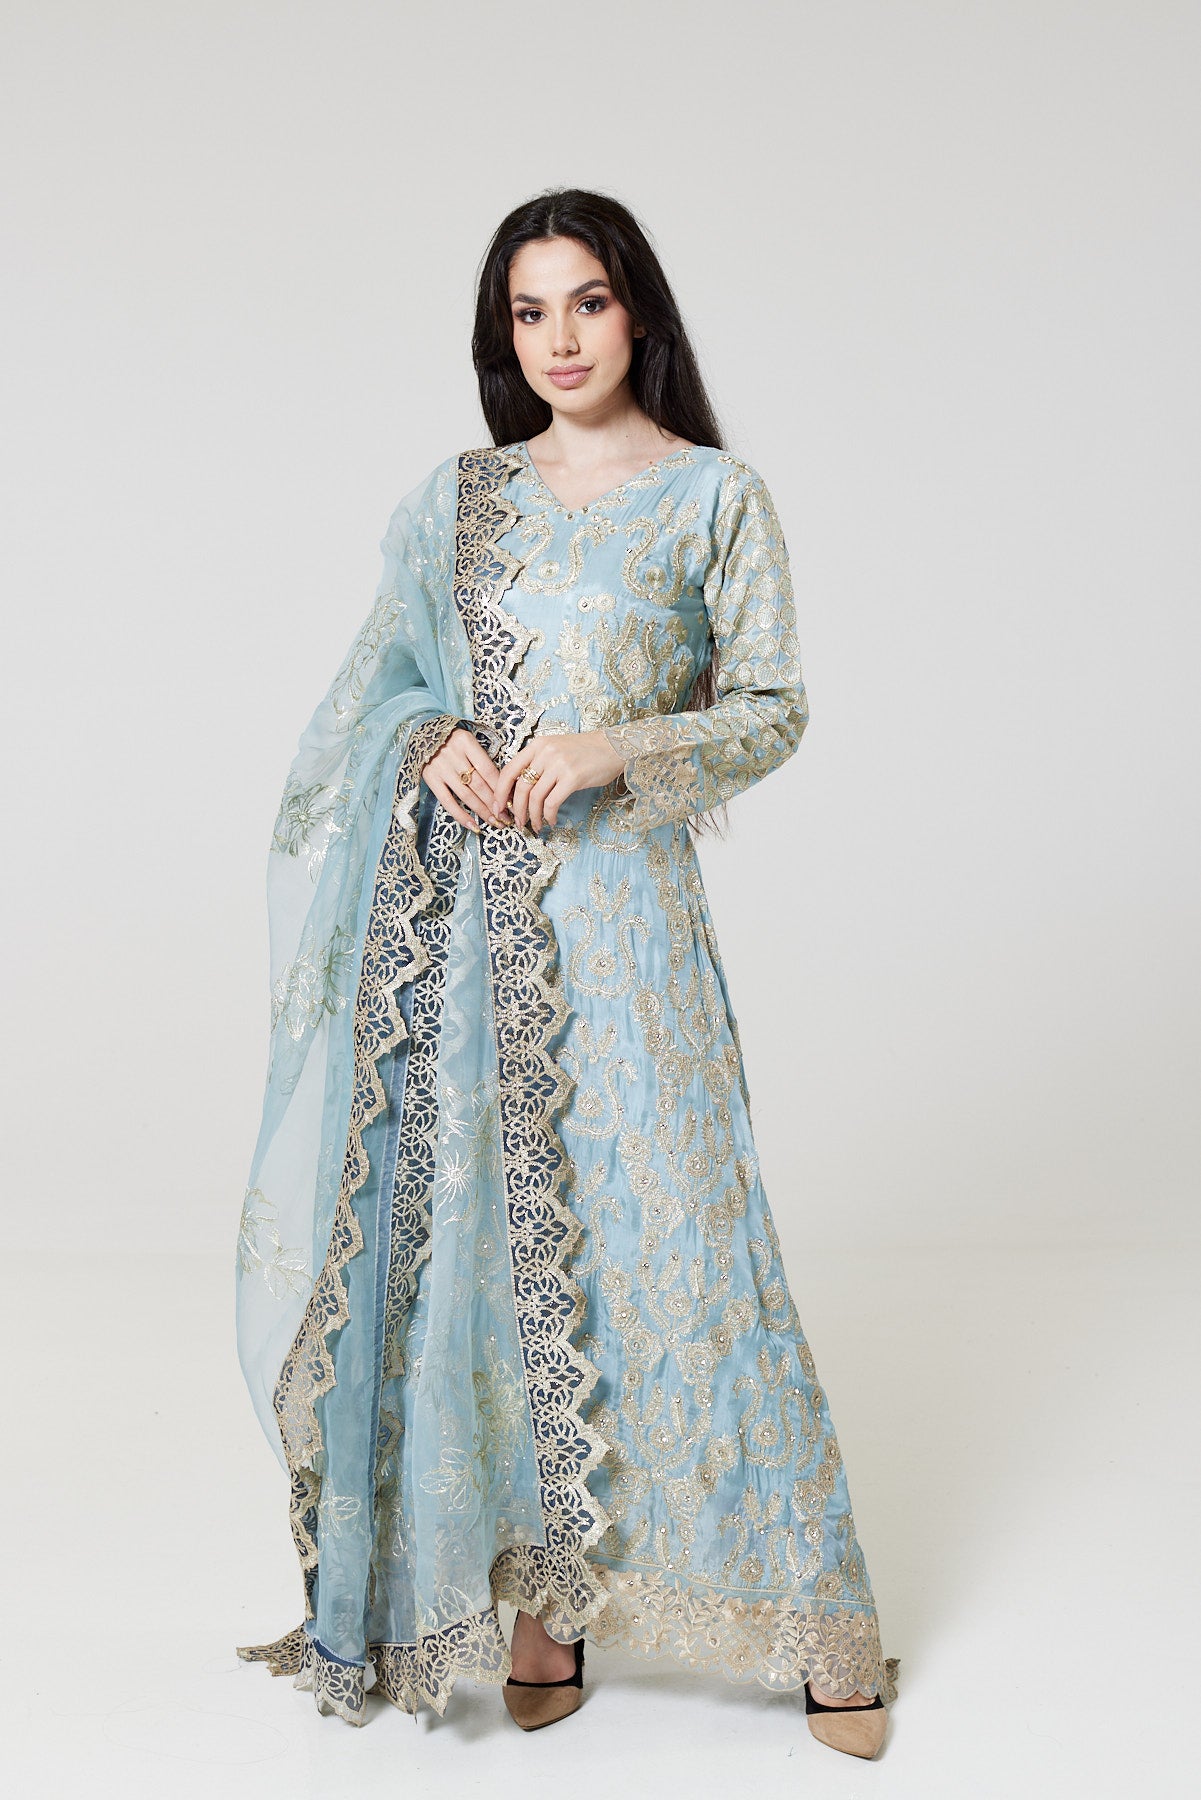 Sky Blue Embroidered Chiffon Suit SB1579